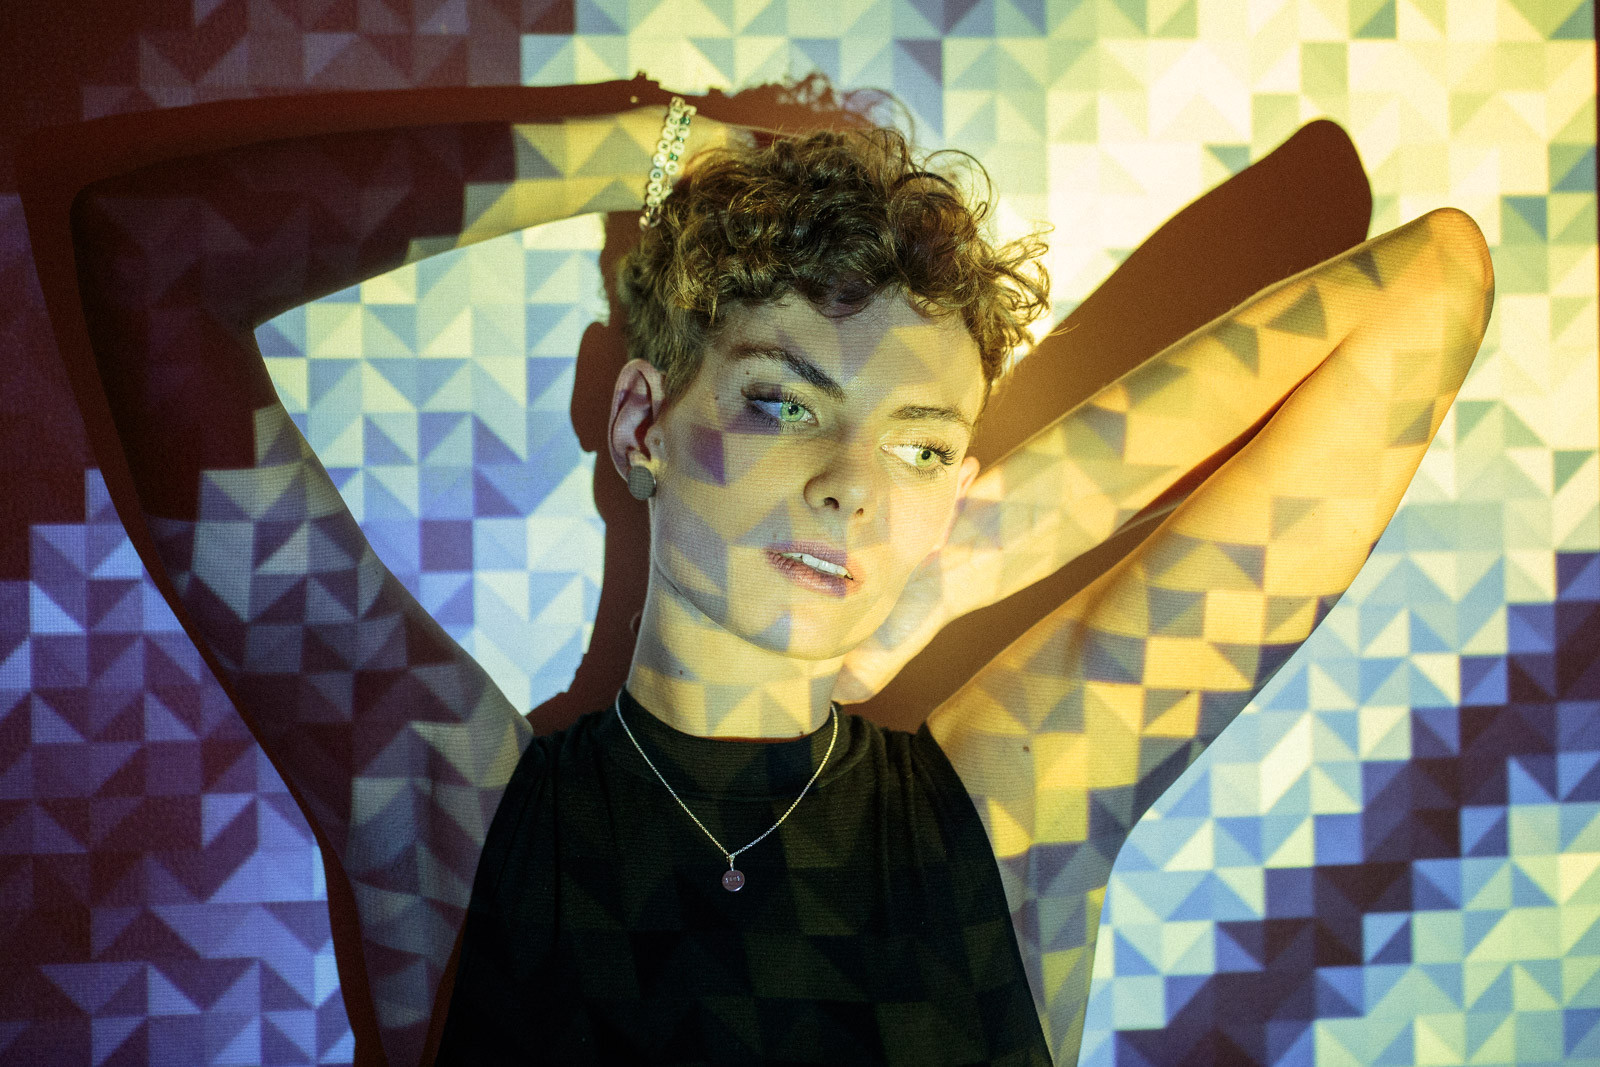 portrait of young woman with short curly hair with projected image of art